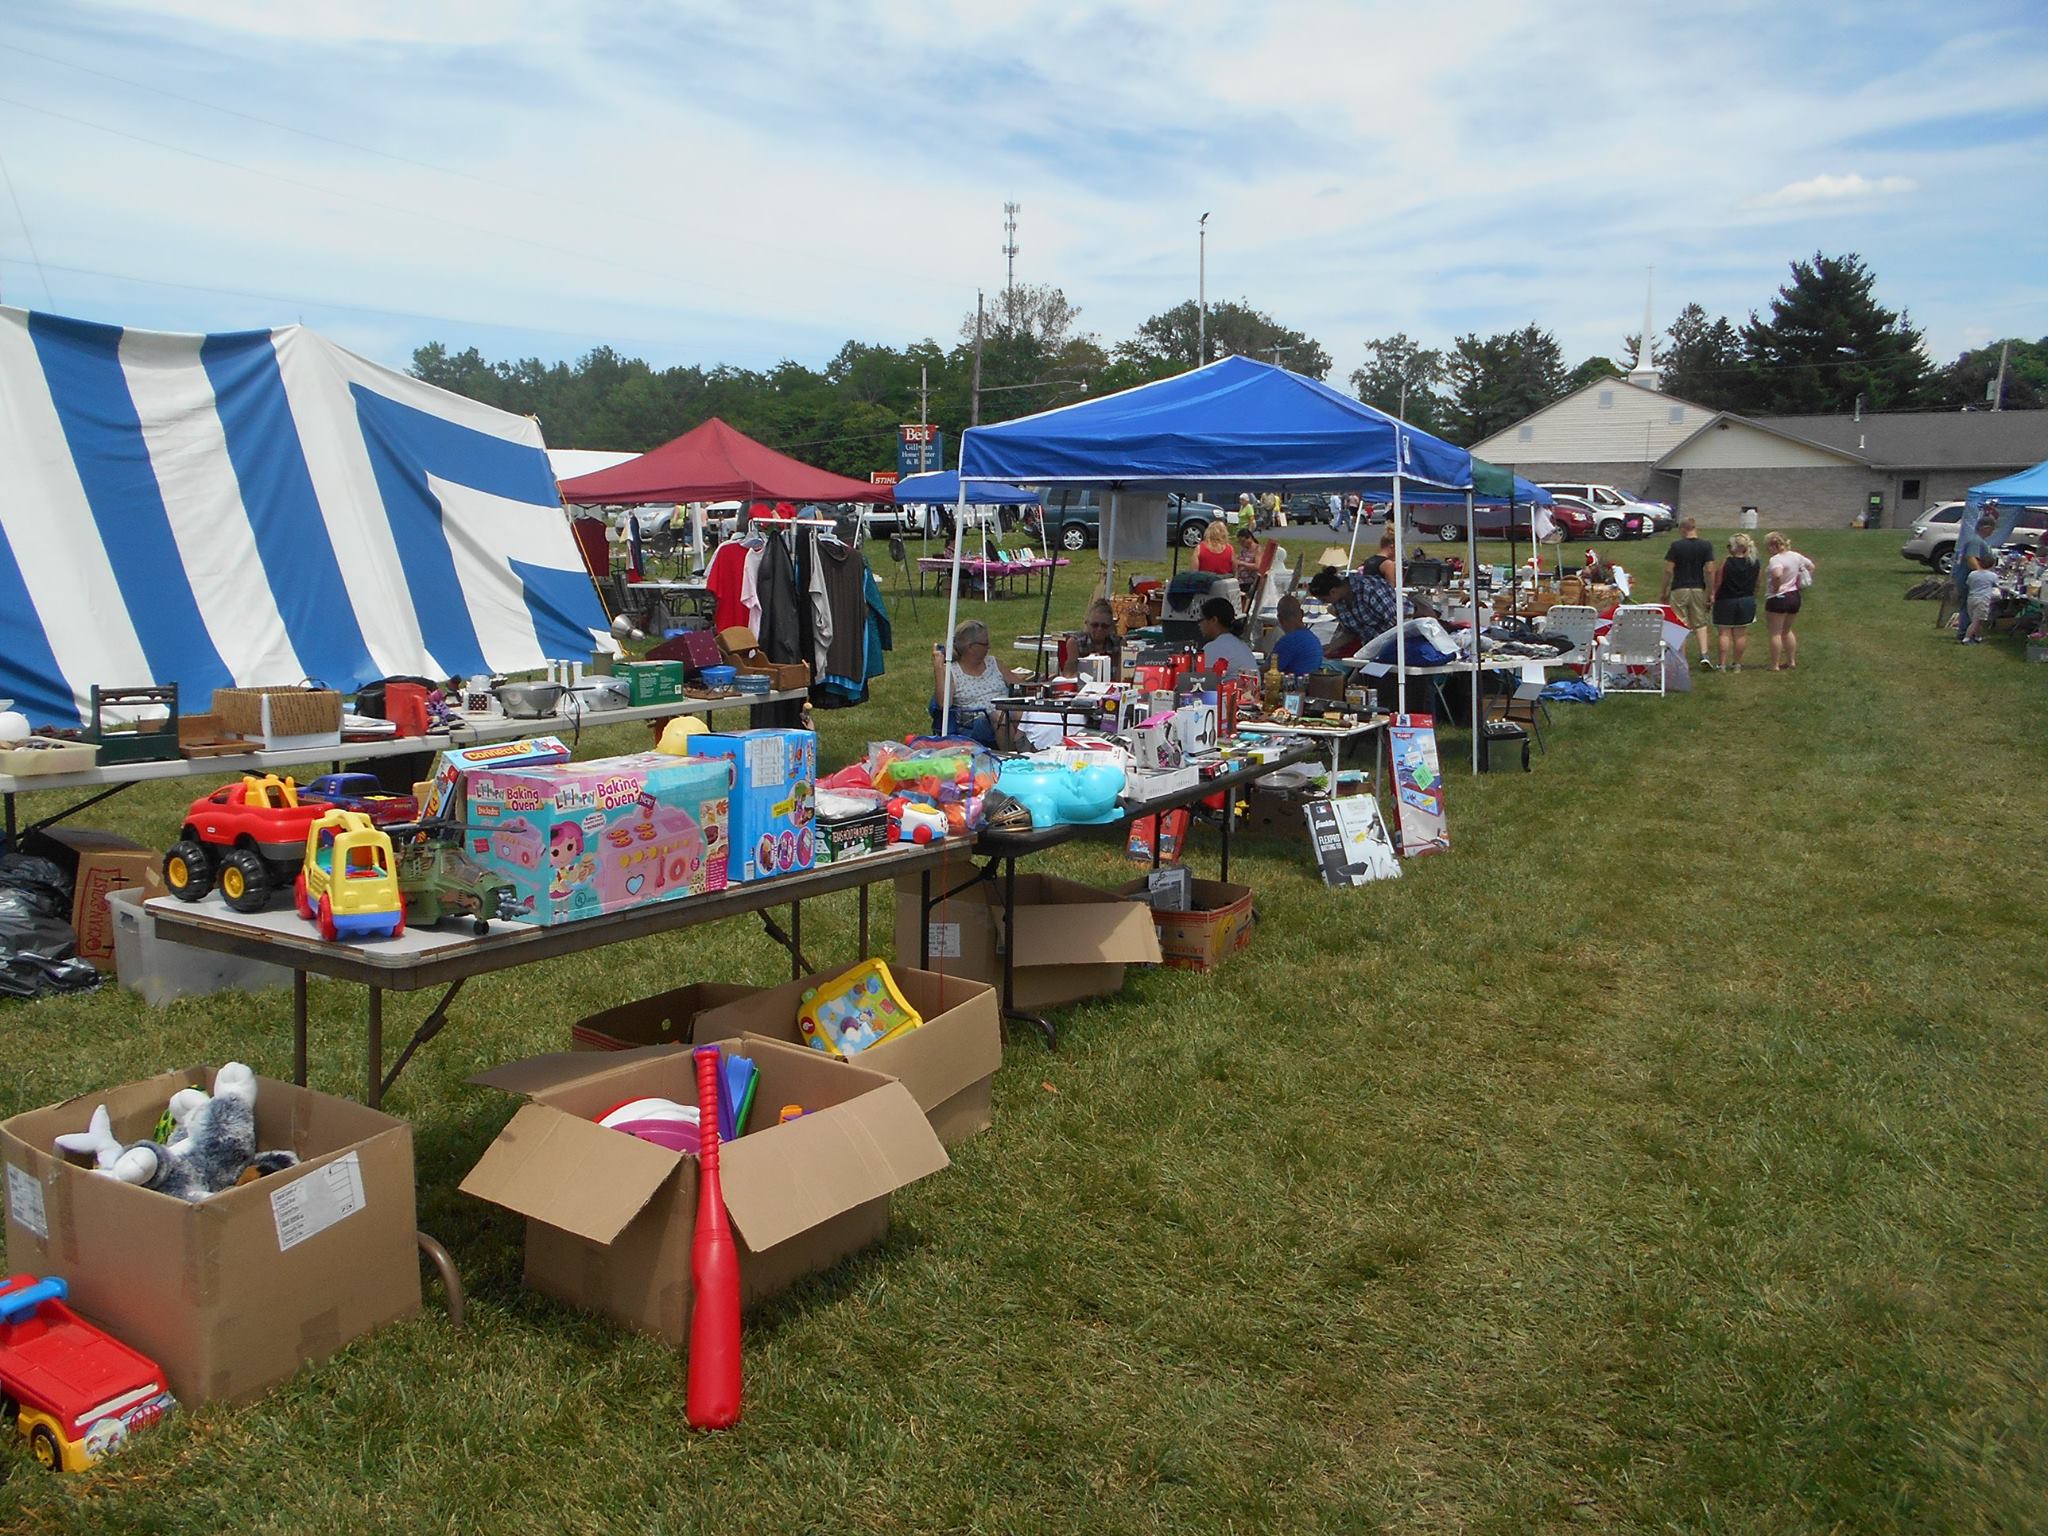 The 800 Mile National Historic Road Yard Sale That Goes Through Maryland